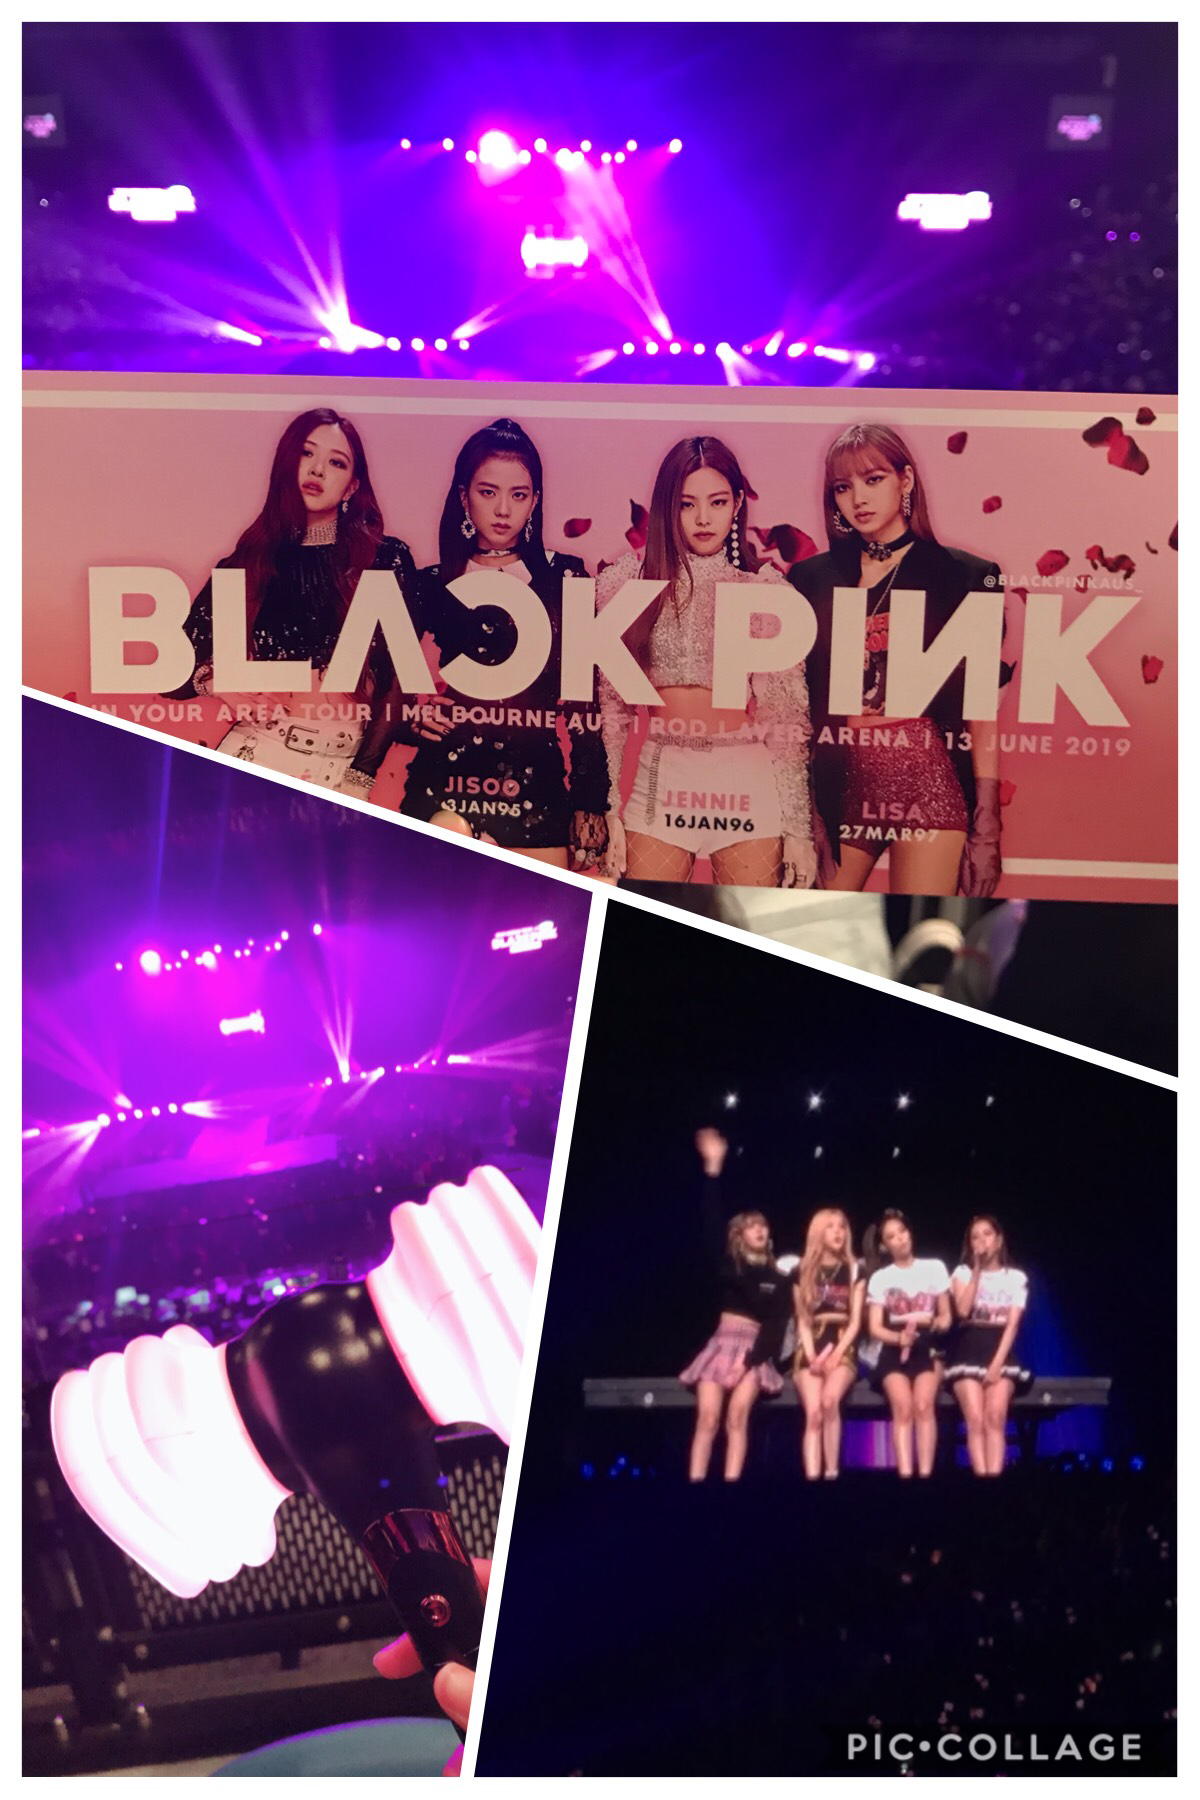 Thanks Blackpink for this amazing night!!! BLINKS will always support you!🖤💞